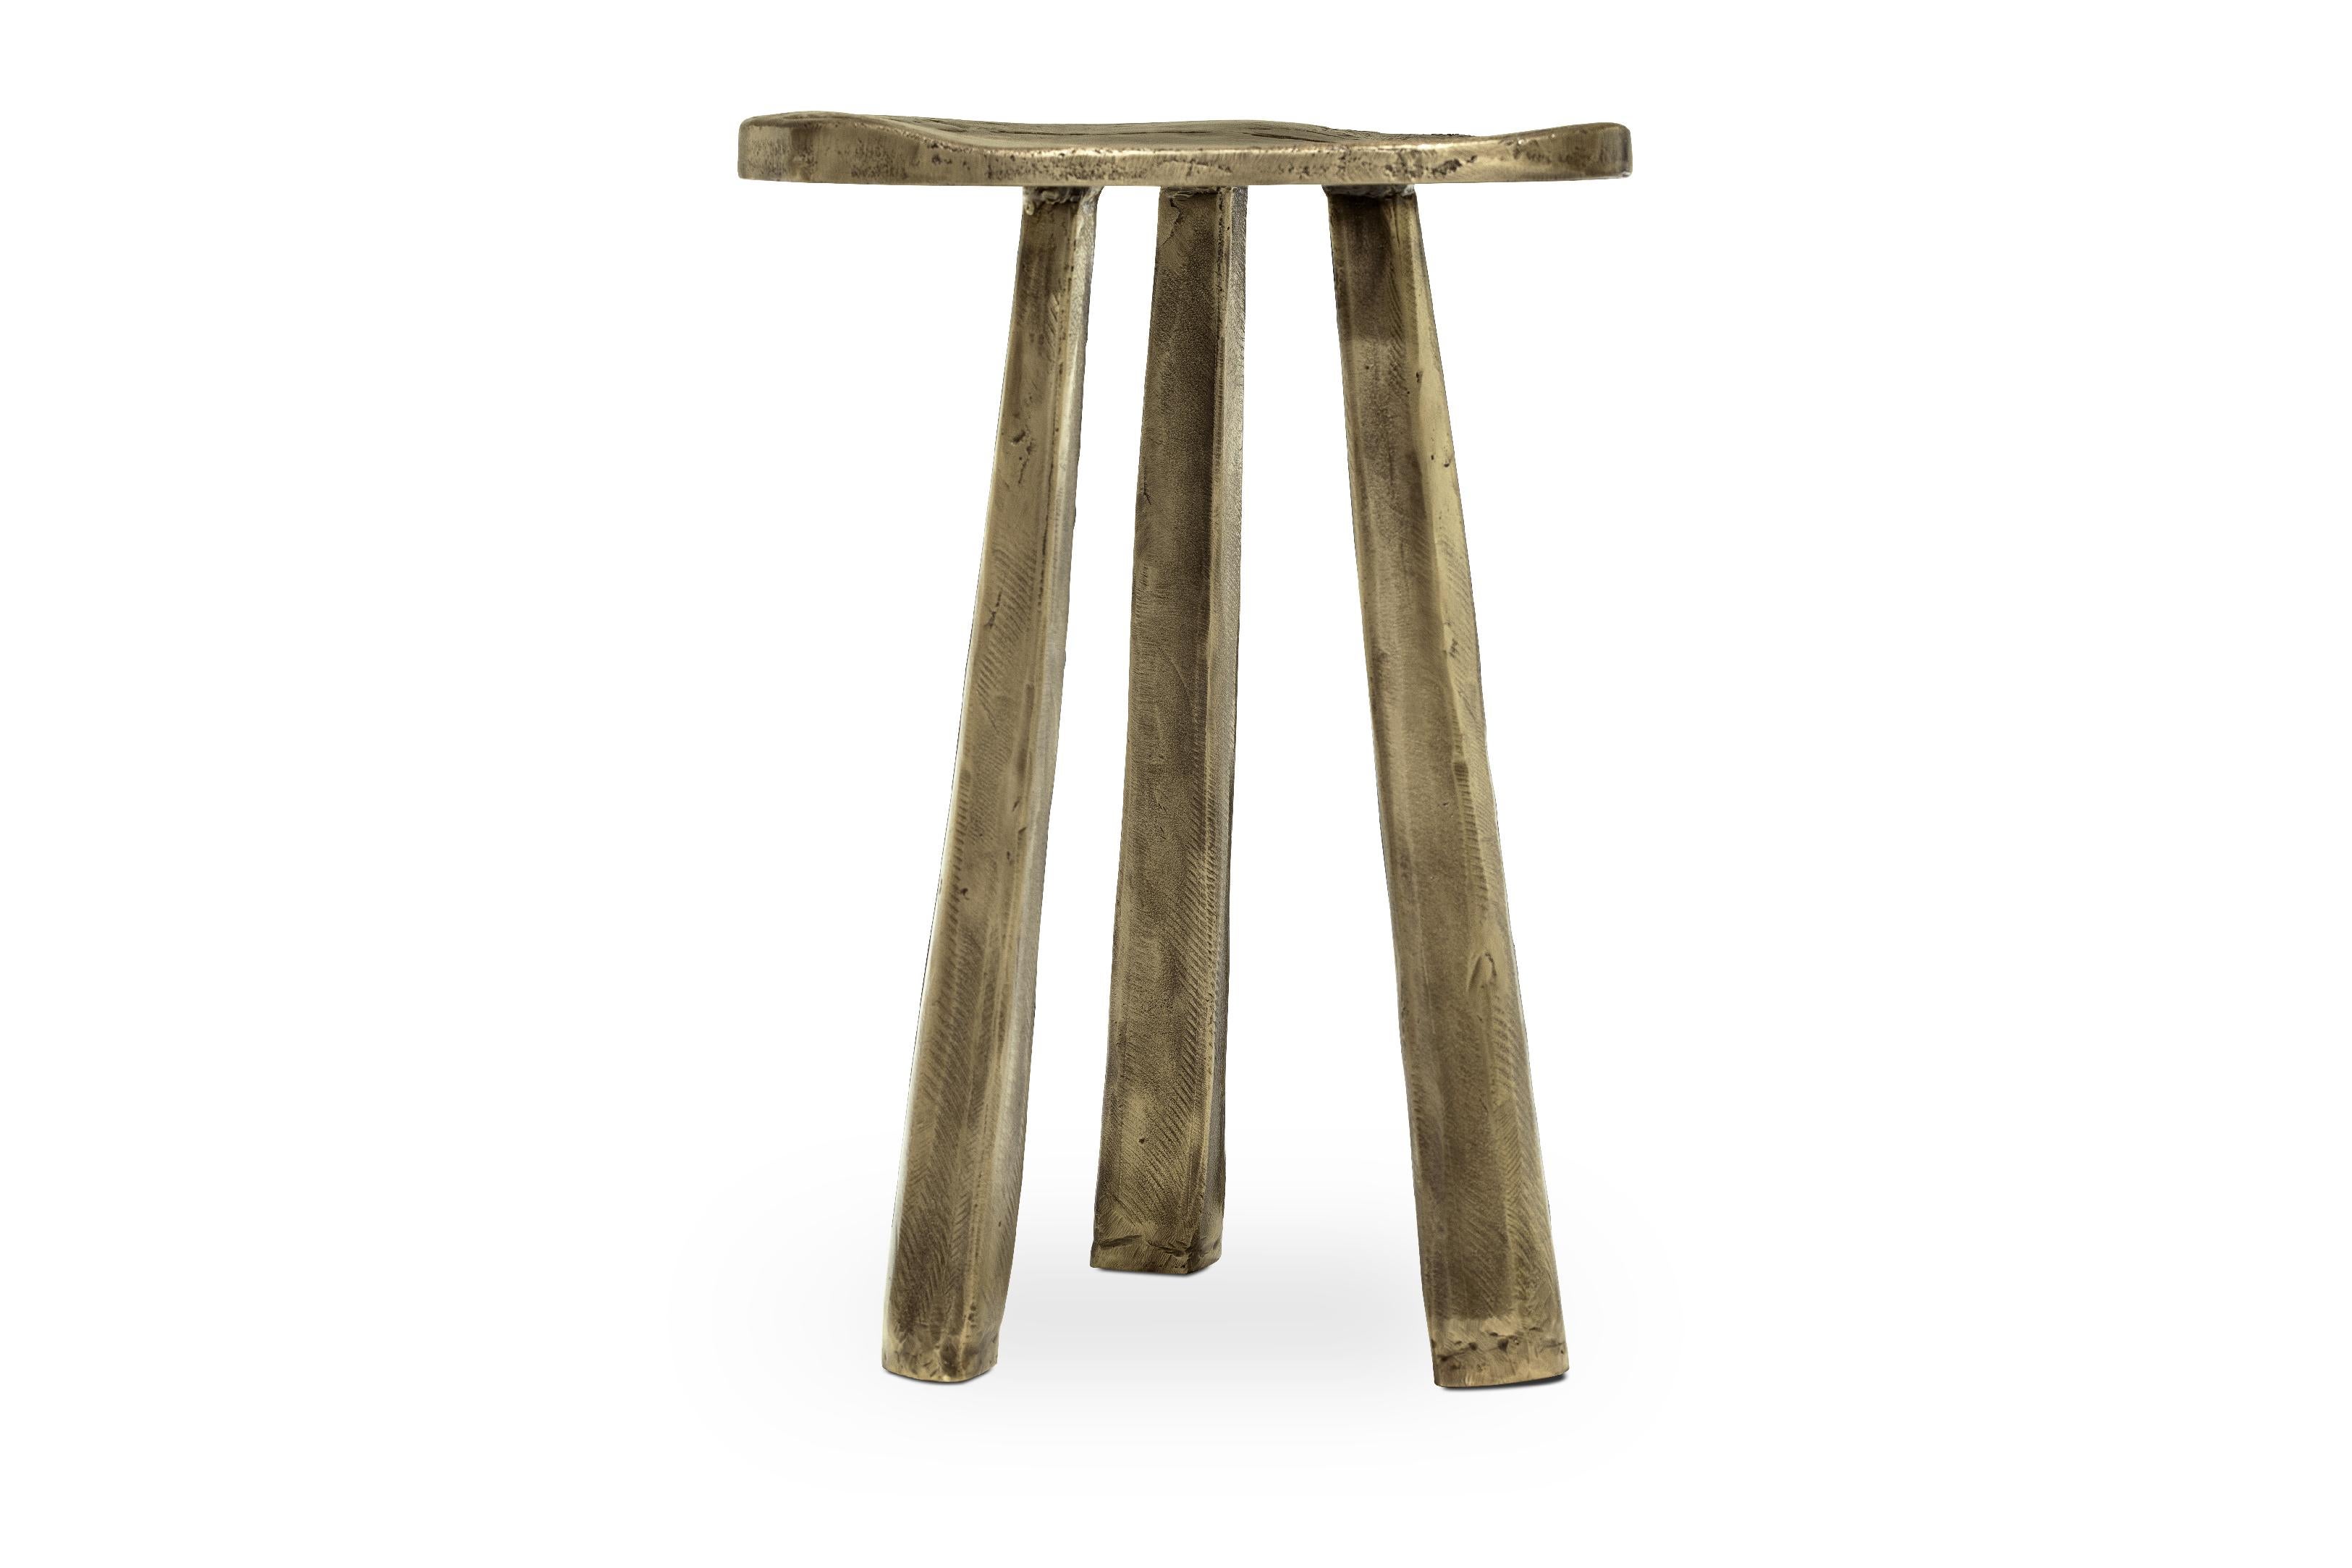 Dolmens are megalithic tombs that usually consist of upright stones supporting a large flat horizontal one. The impressive structure inspired the creation of Dolmen stool, a unique furniture design piece. This brass stool, with three legs & made of